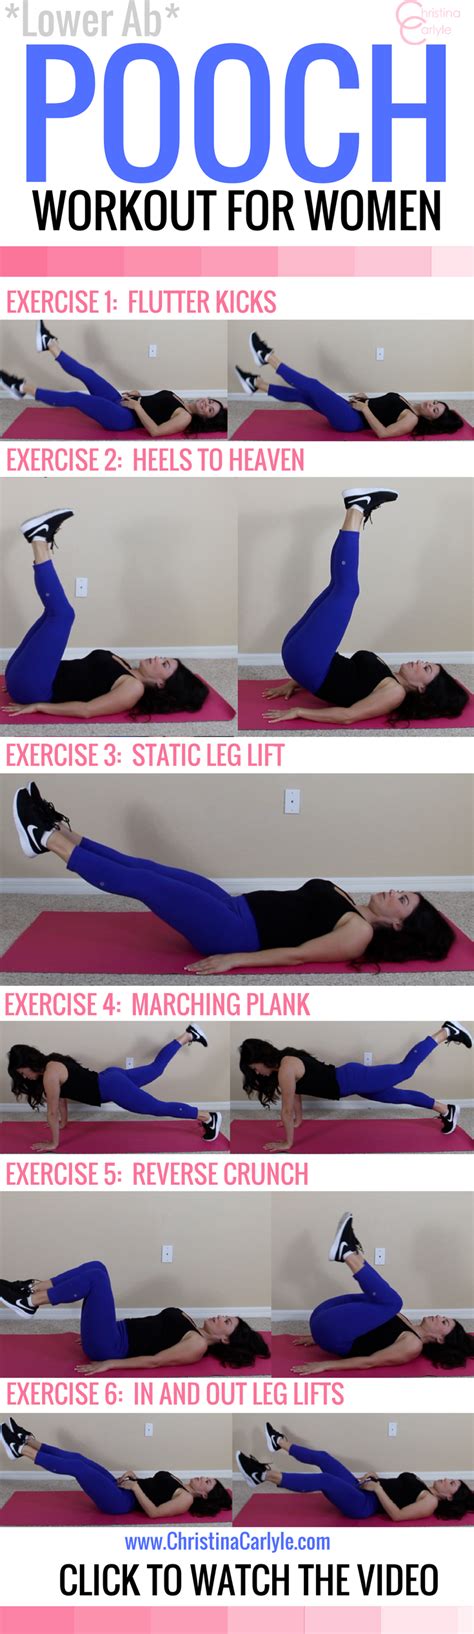 Lower Ab Pooch Workout For Women Want To Flatter Your Lower Ab Pooch